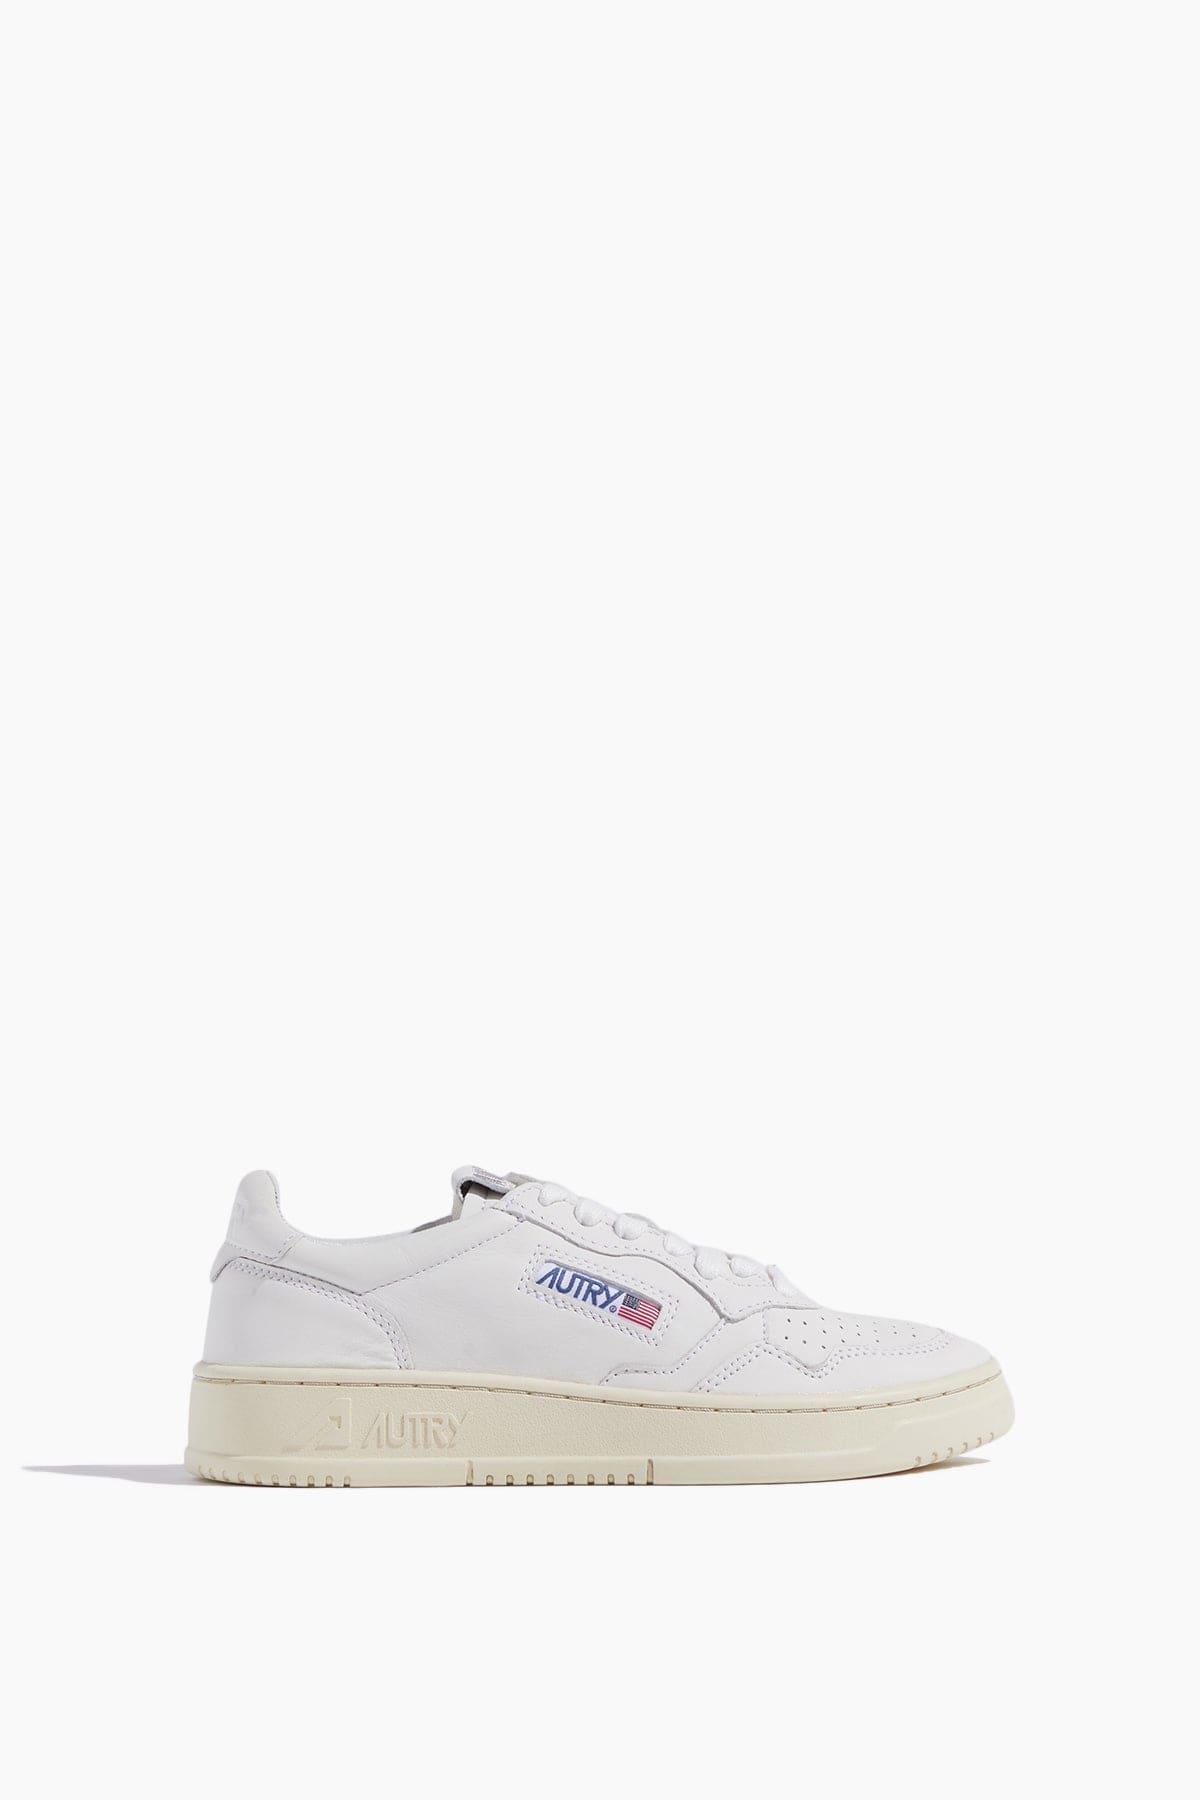 Autry 01 Low Sneakers Goat/goat White | Lyst